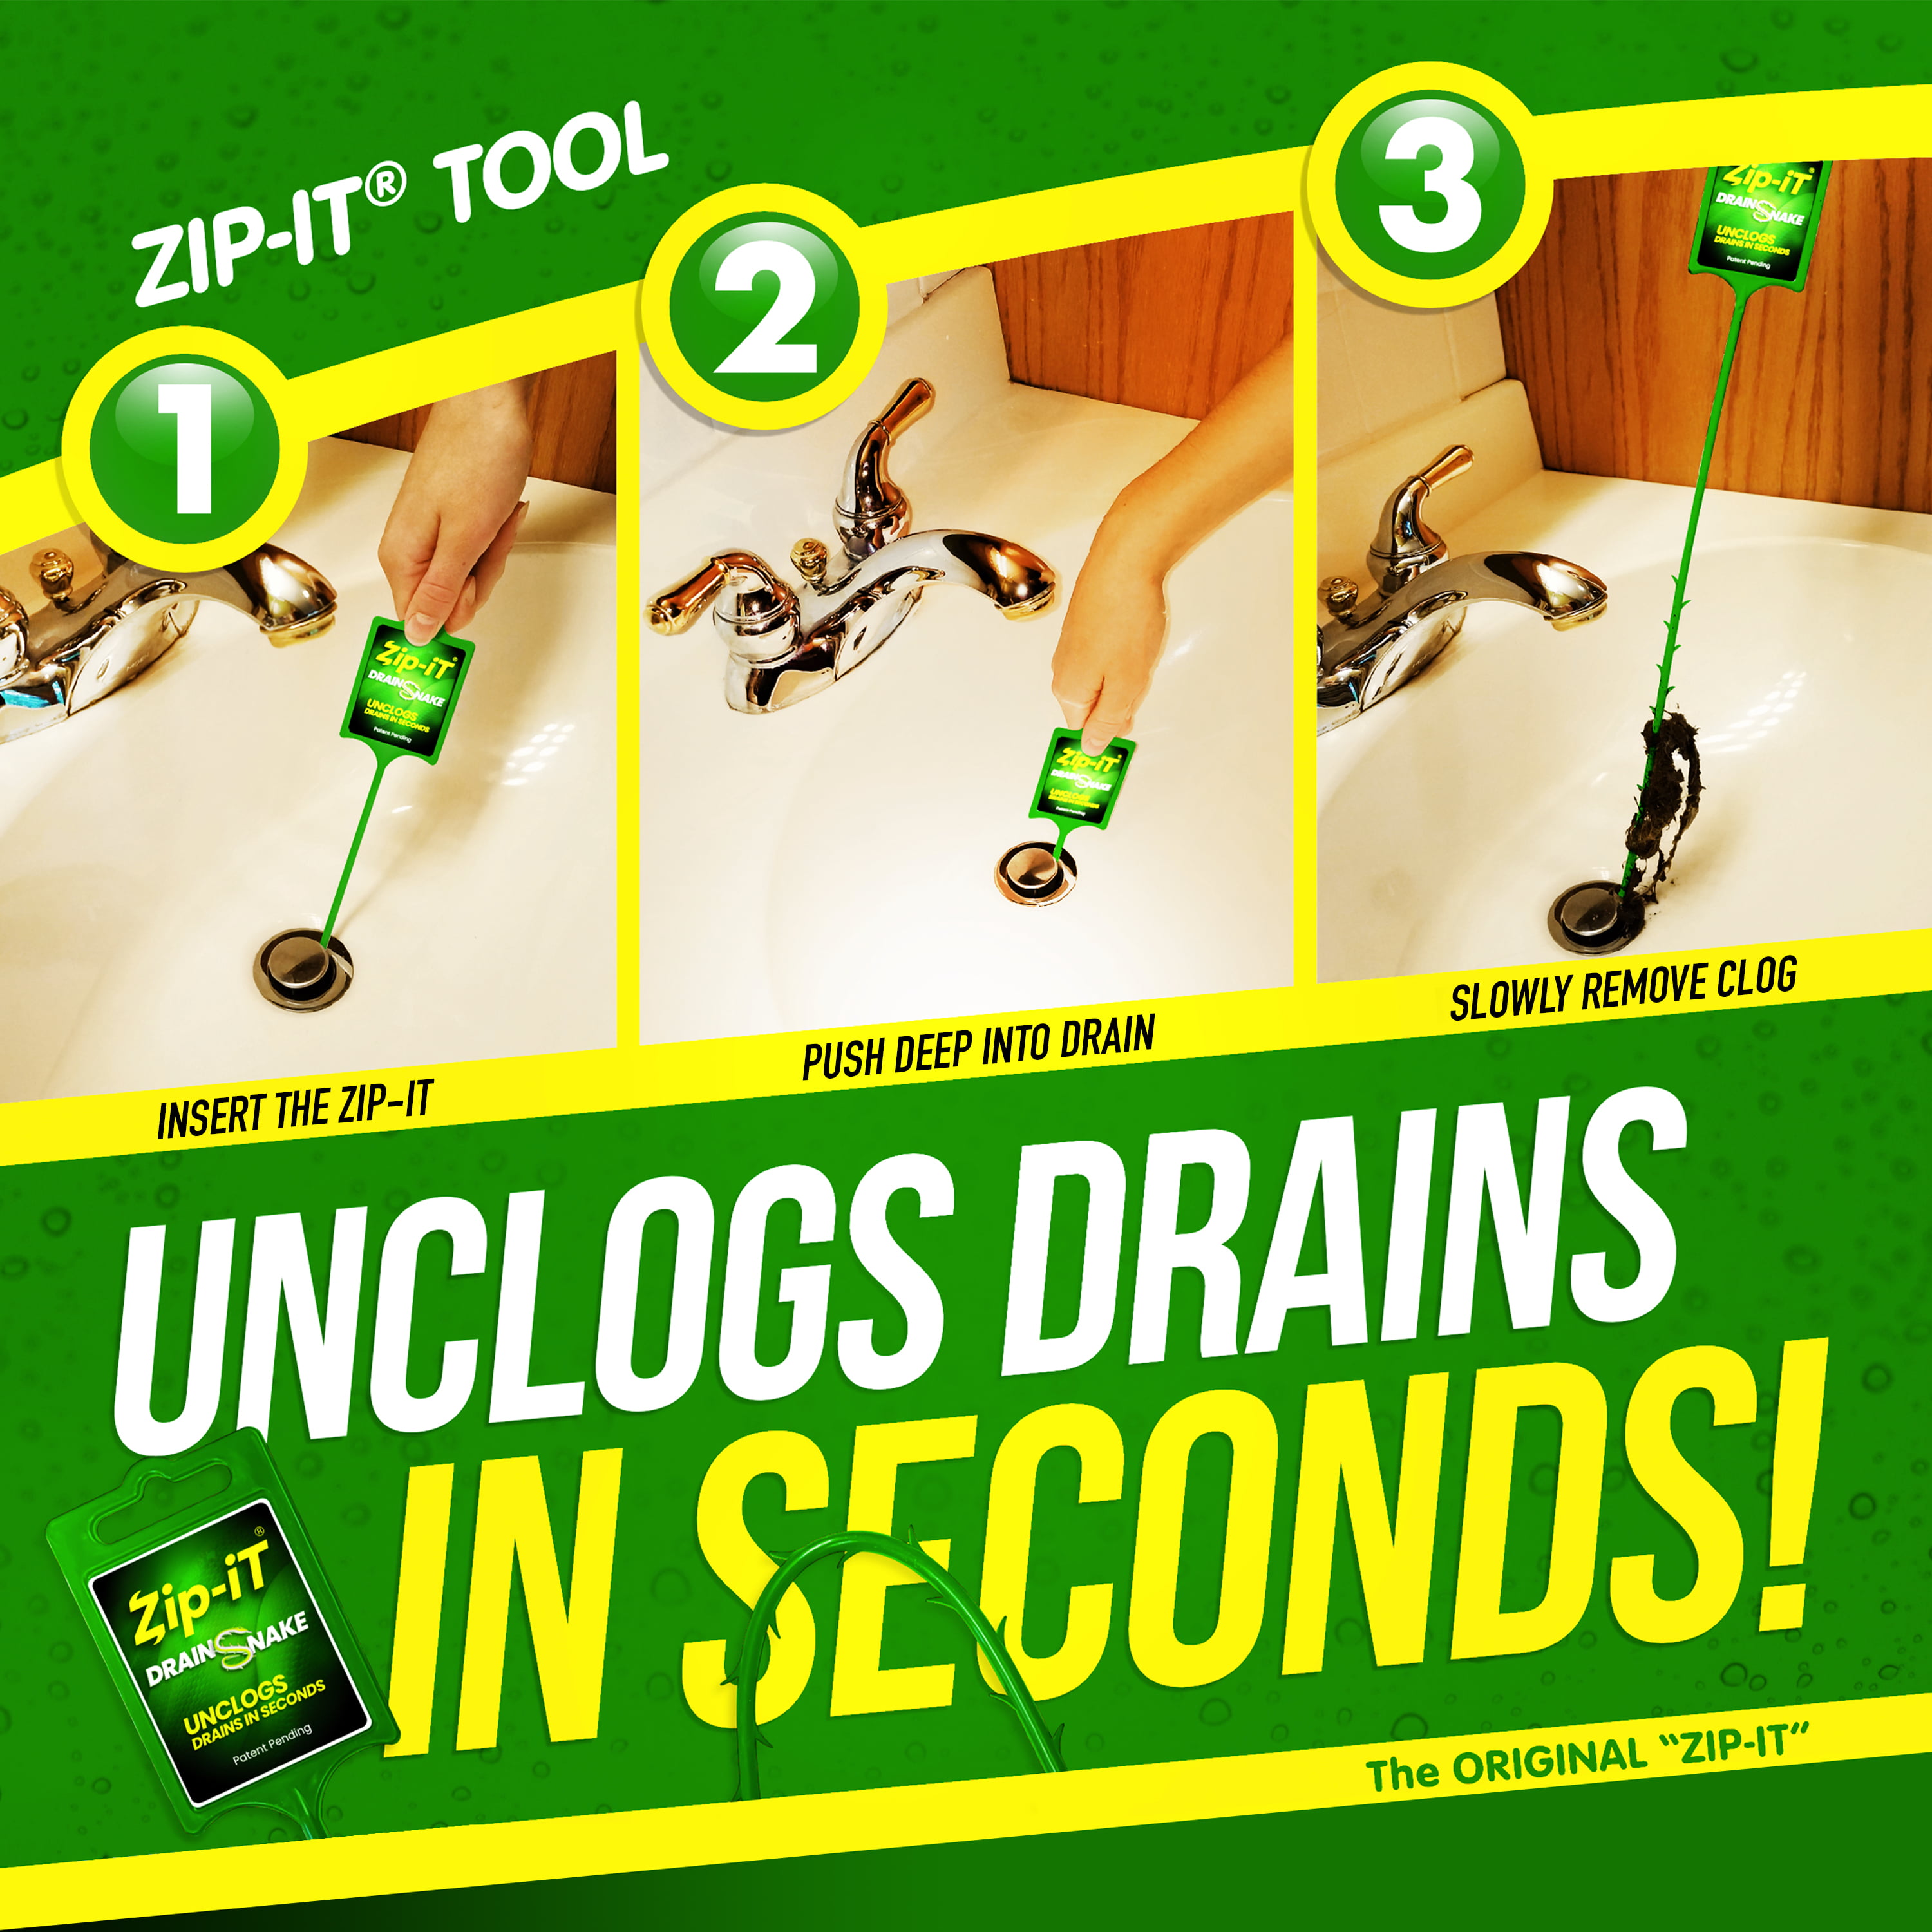 New Zip It® Drain Cleaning Tool (Drain Snake) - Zip It Clean Inventing